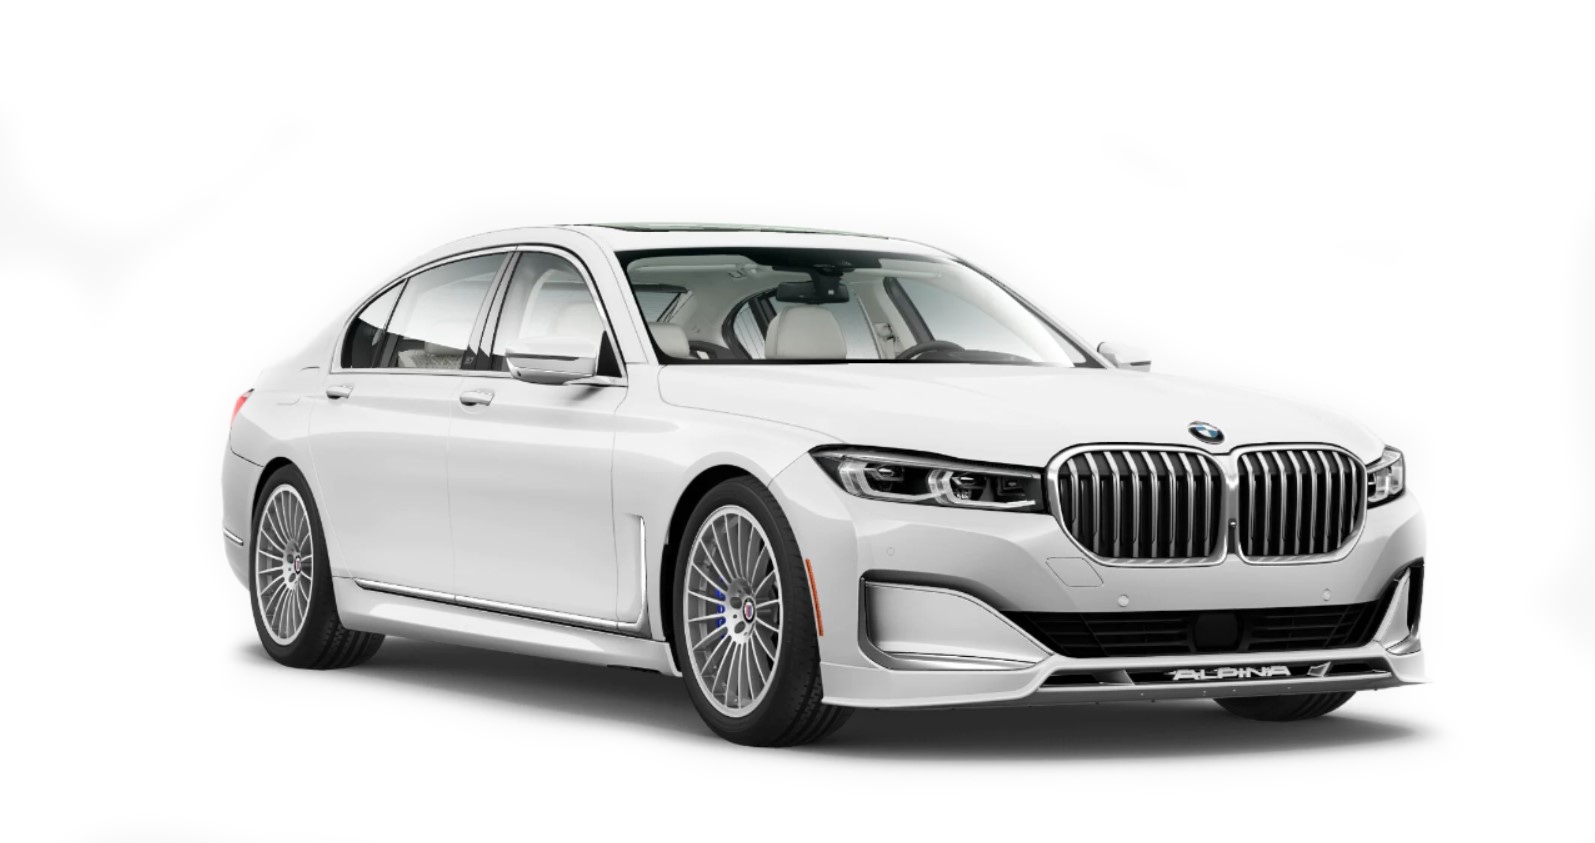 2020 BMW Alpina B7 xDrive Full Specs, Features and Price | CarBuzz